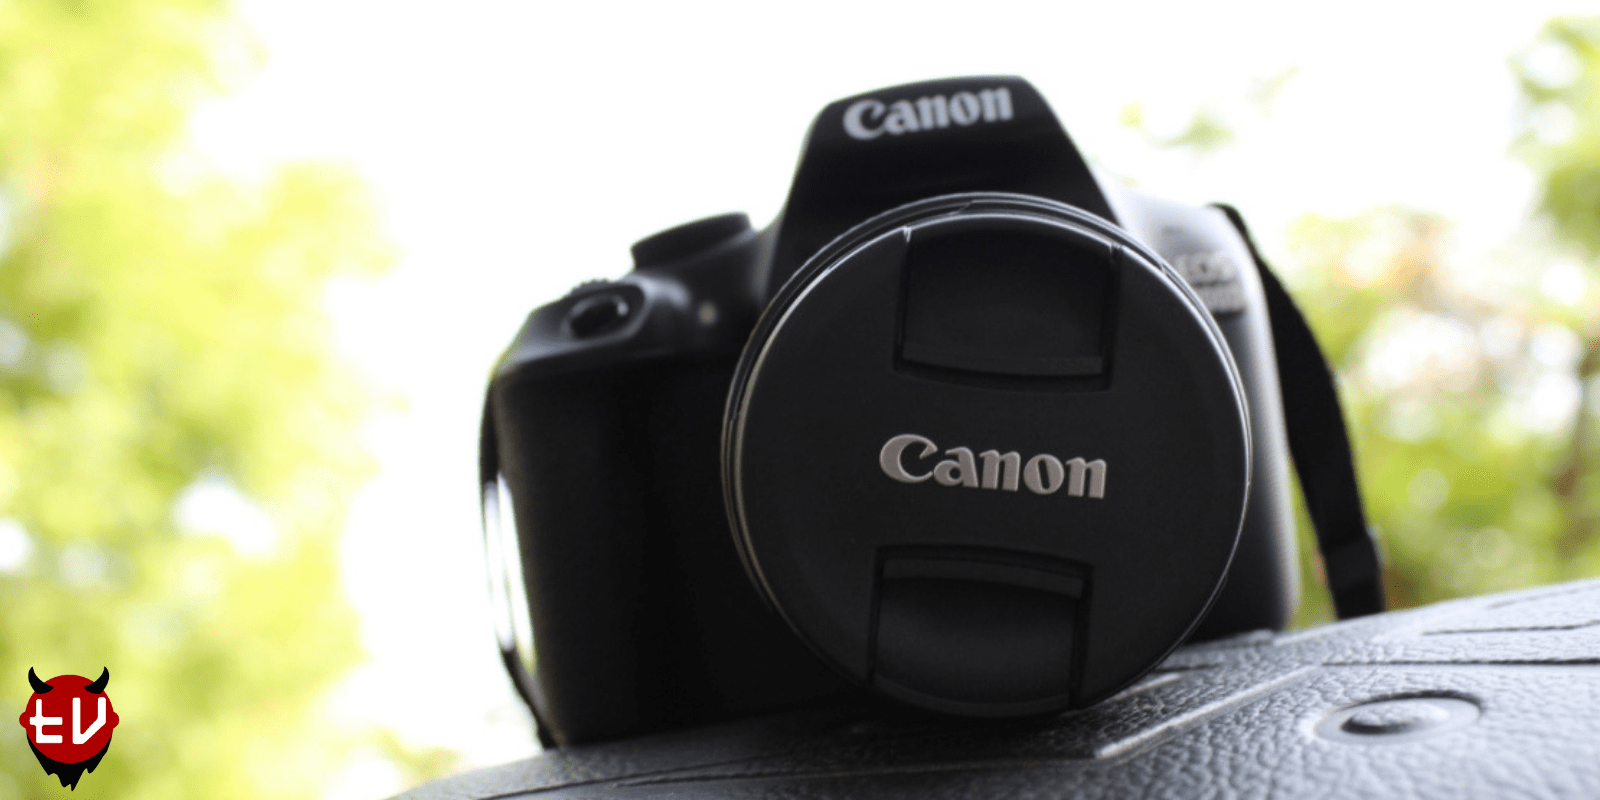 Canon 1300D Comprehensive Review - Best DSLR to start with?